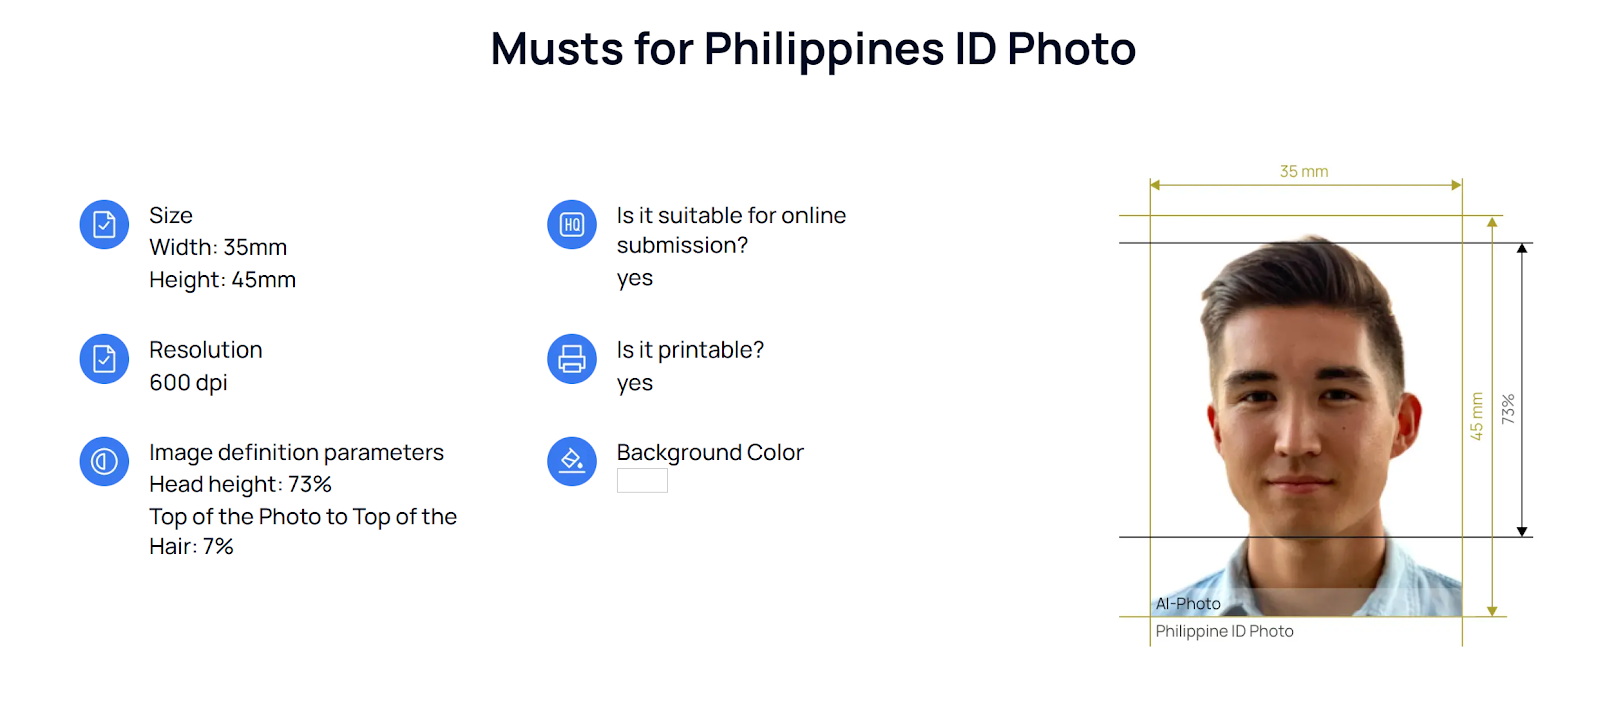 the requirements for Philippines ID photo